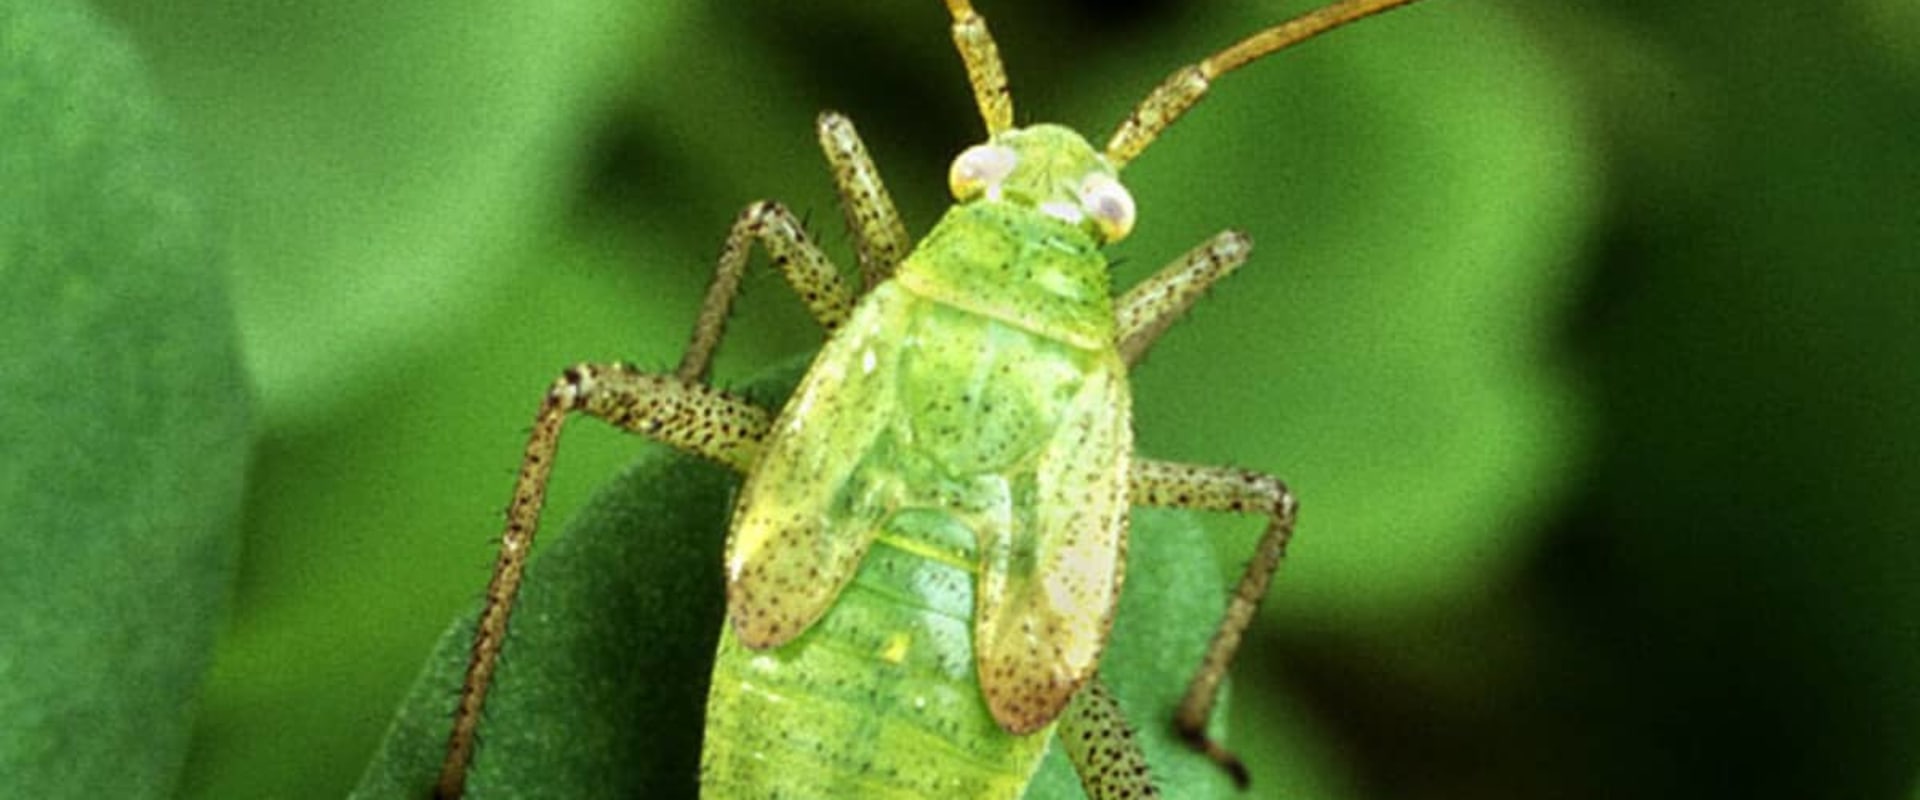 What are the three advantage of biological control?